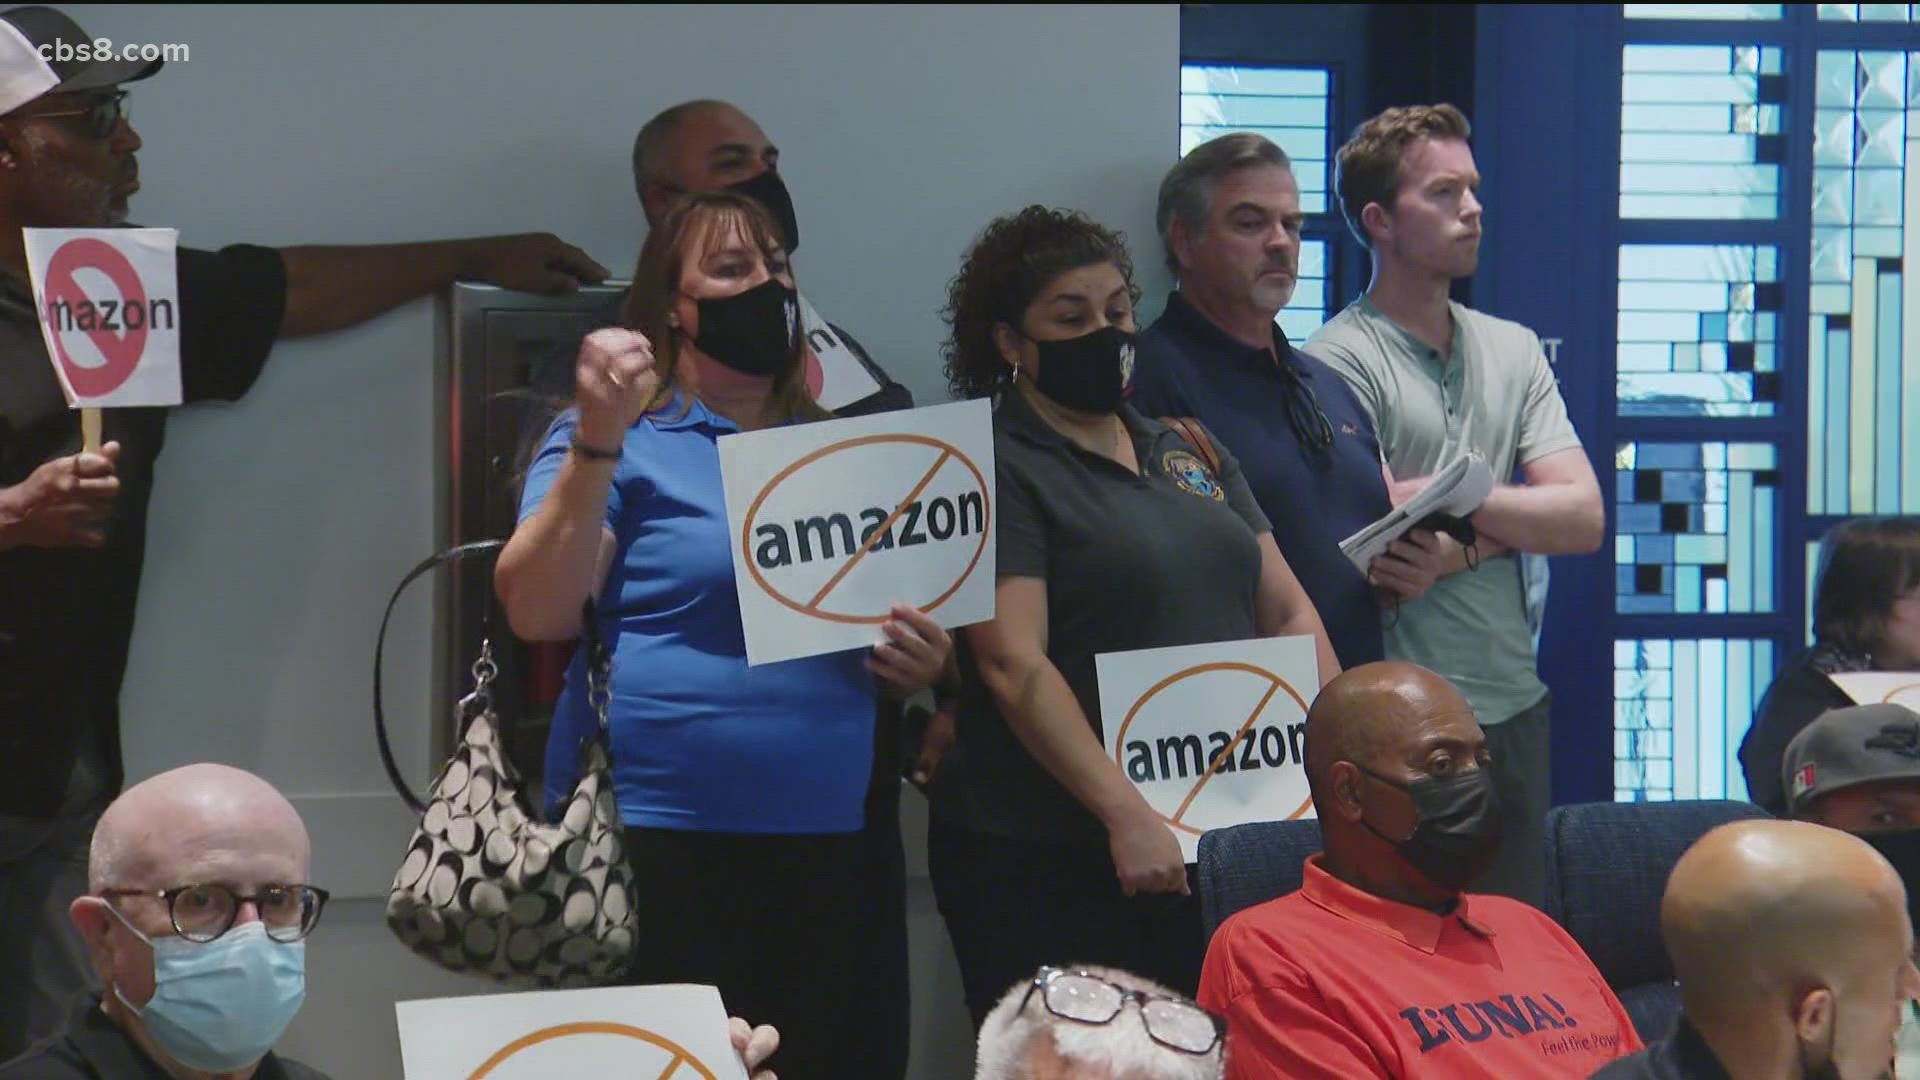 On Wednesday night, a victory for people who live in Oceanside who battled to keep a new Amazon distribution center out of their community.